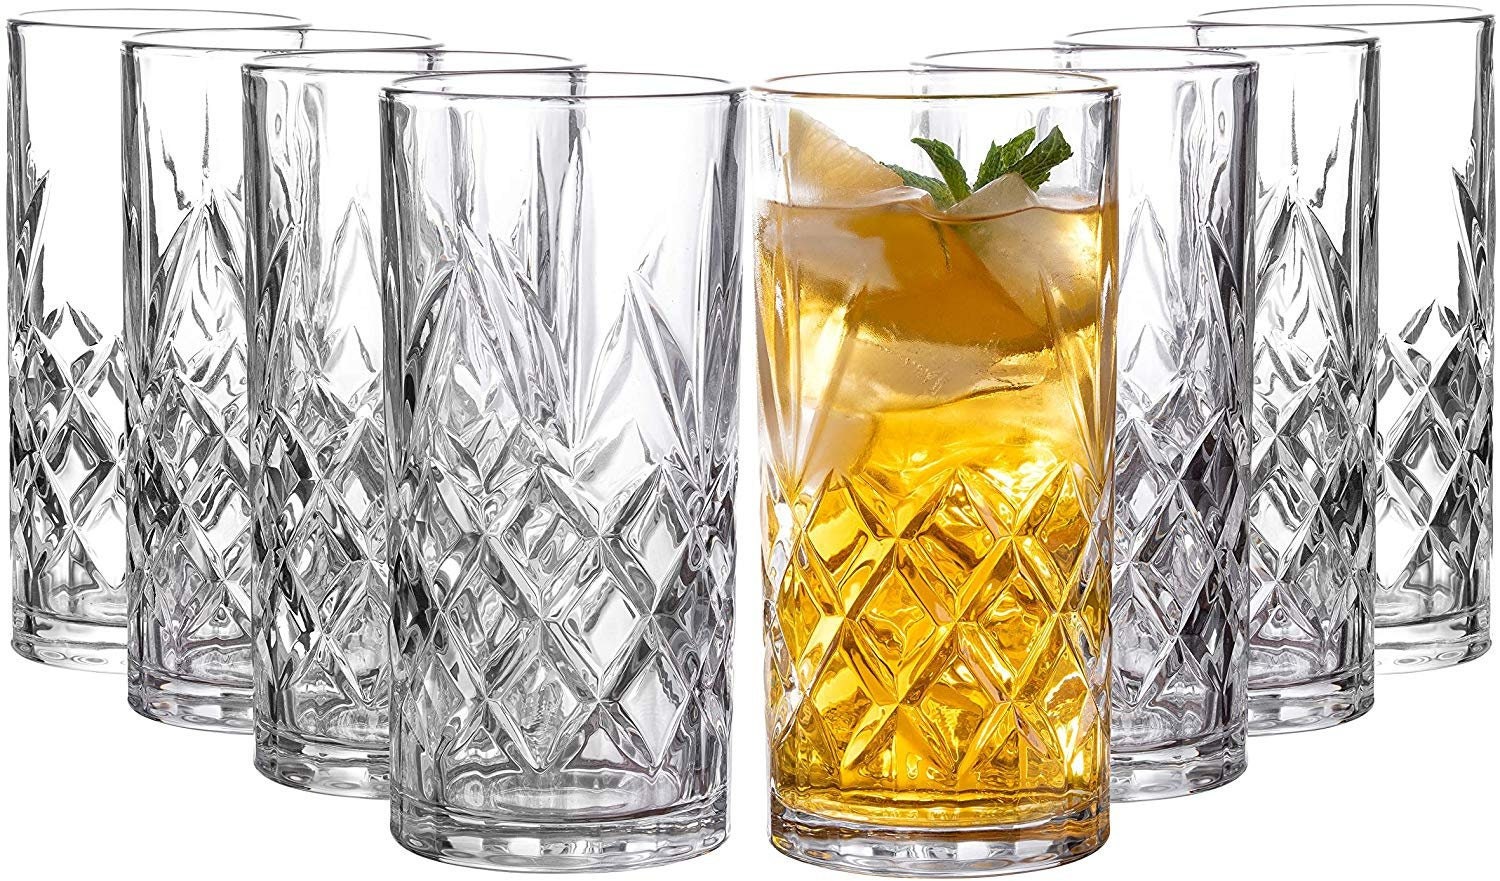 Royalty Art Kinsley Tall Highball Glasses Set of 8, 12 Ounce Cups, Textured  Designer Glassware for D…See more Royalty Art Kinsley Tall Highball